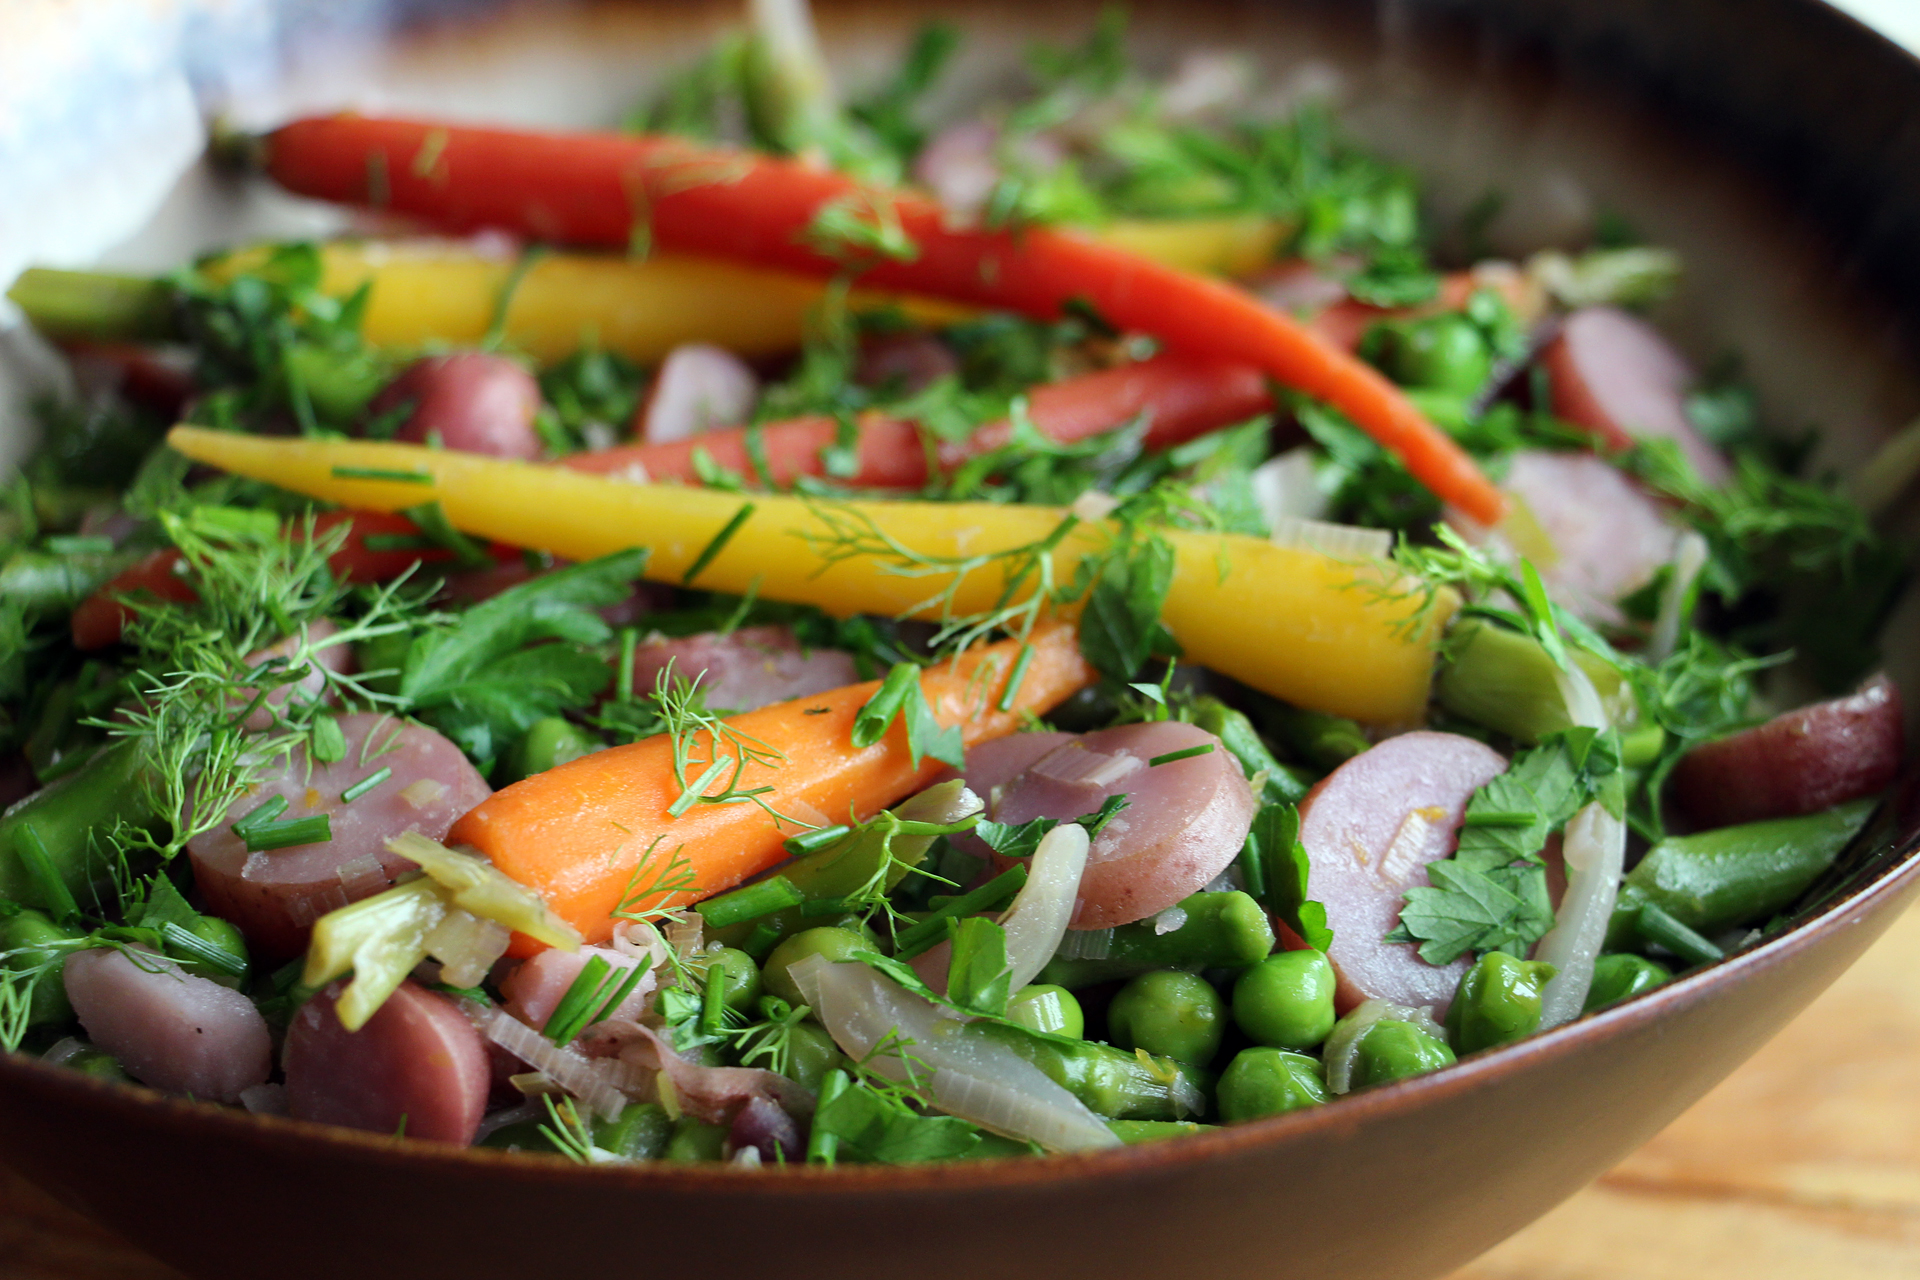 Springtime Vegetable Ragout with Asparagus, New Potatoes, Baby Carrots, Fennel, Fresh Peas, and Herbs